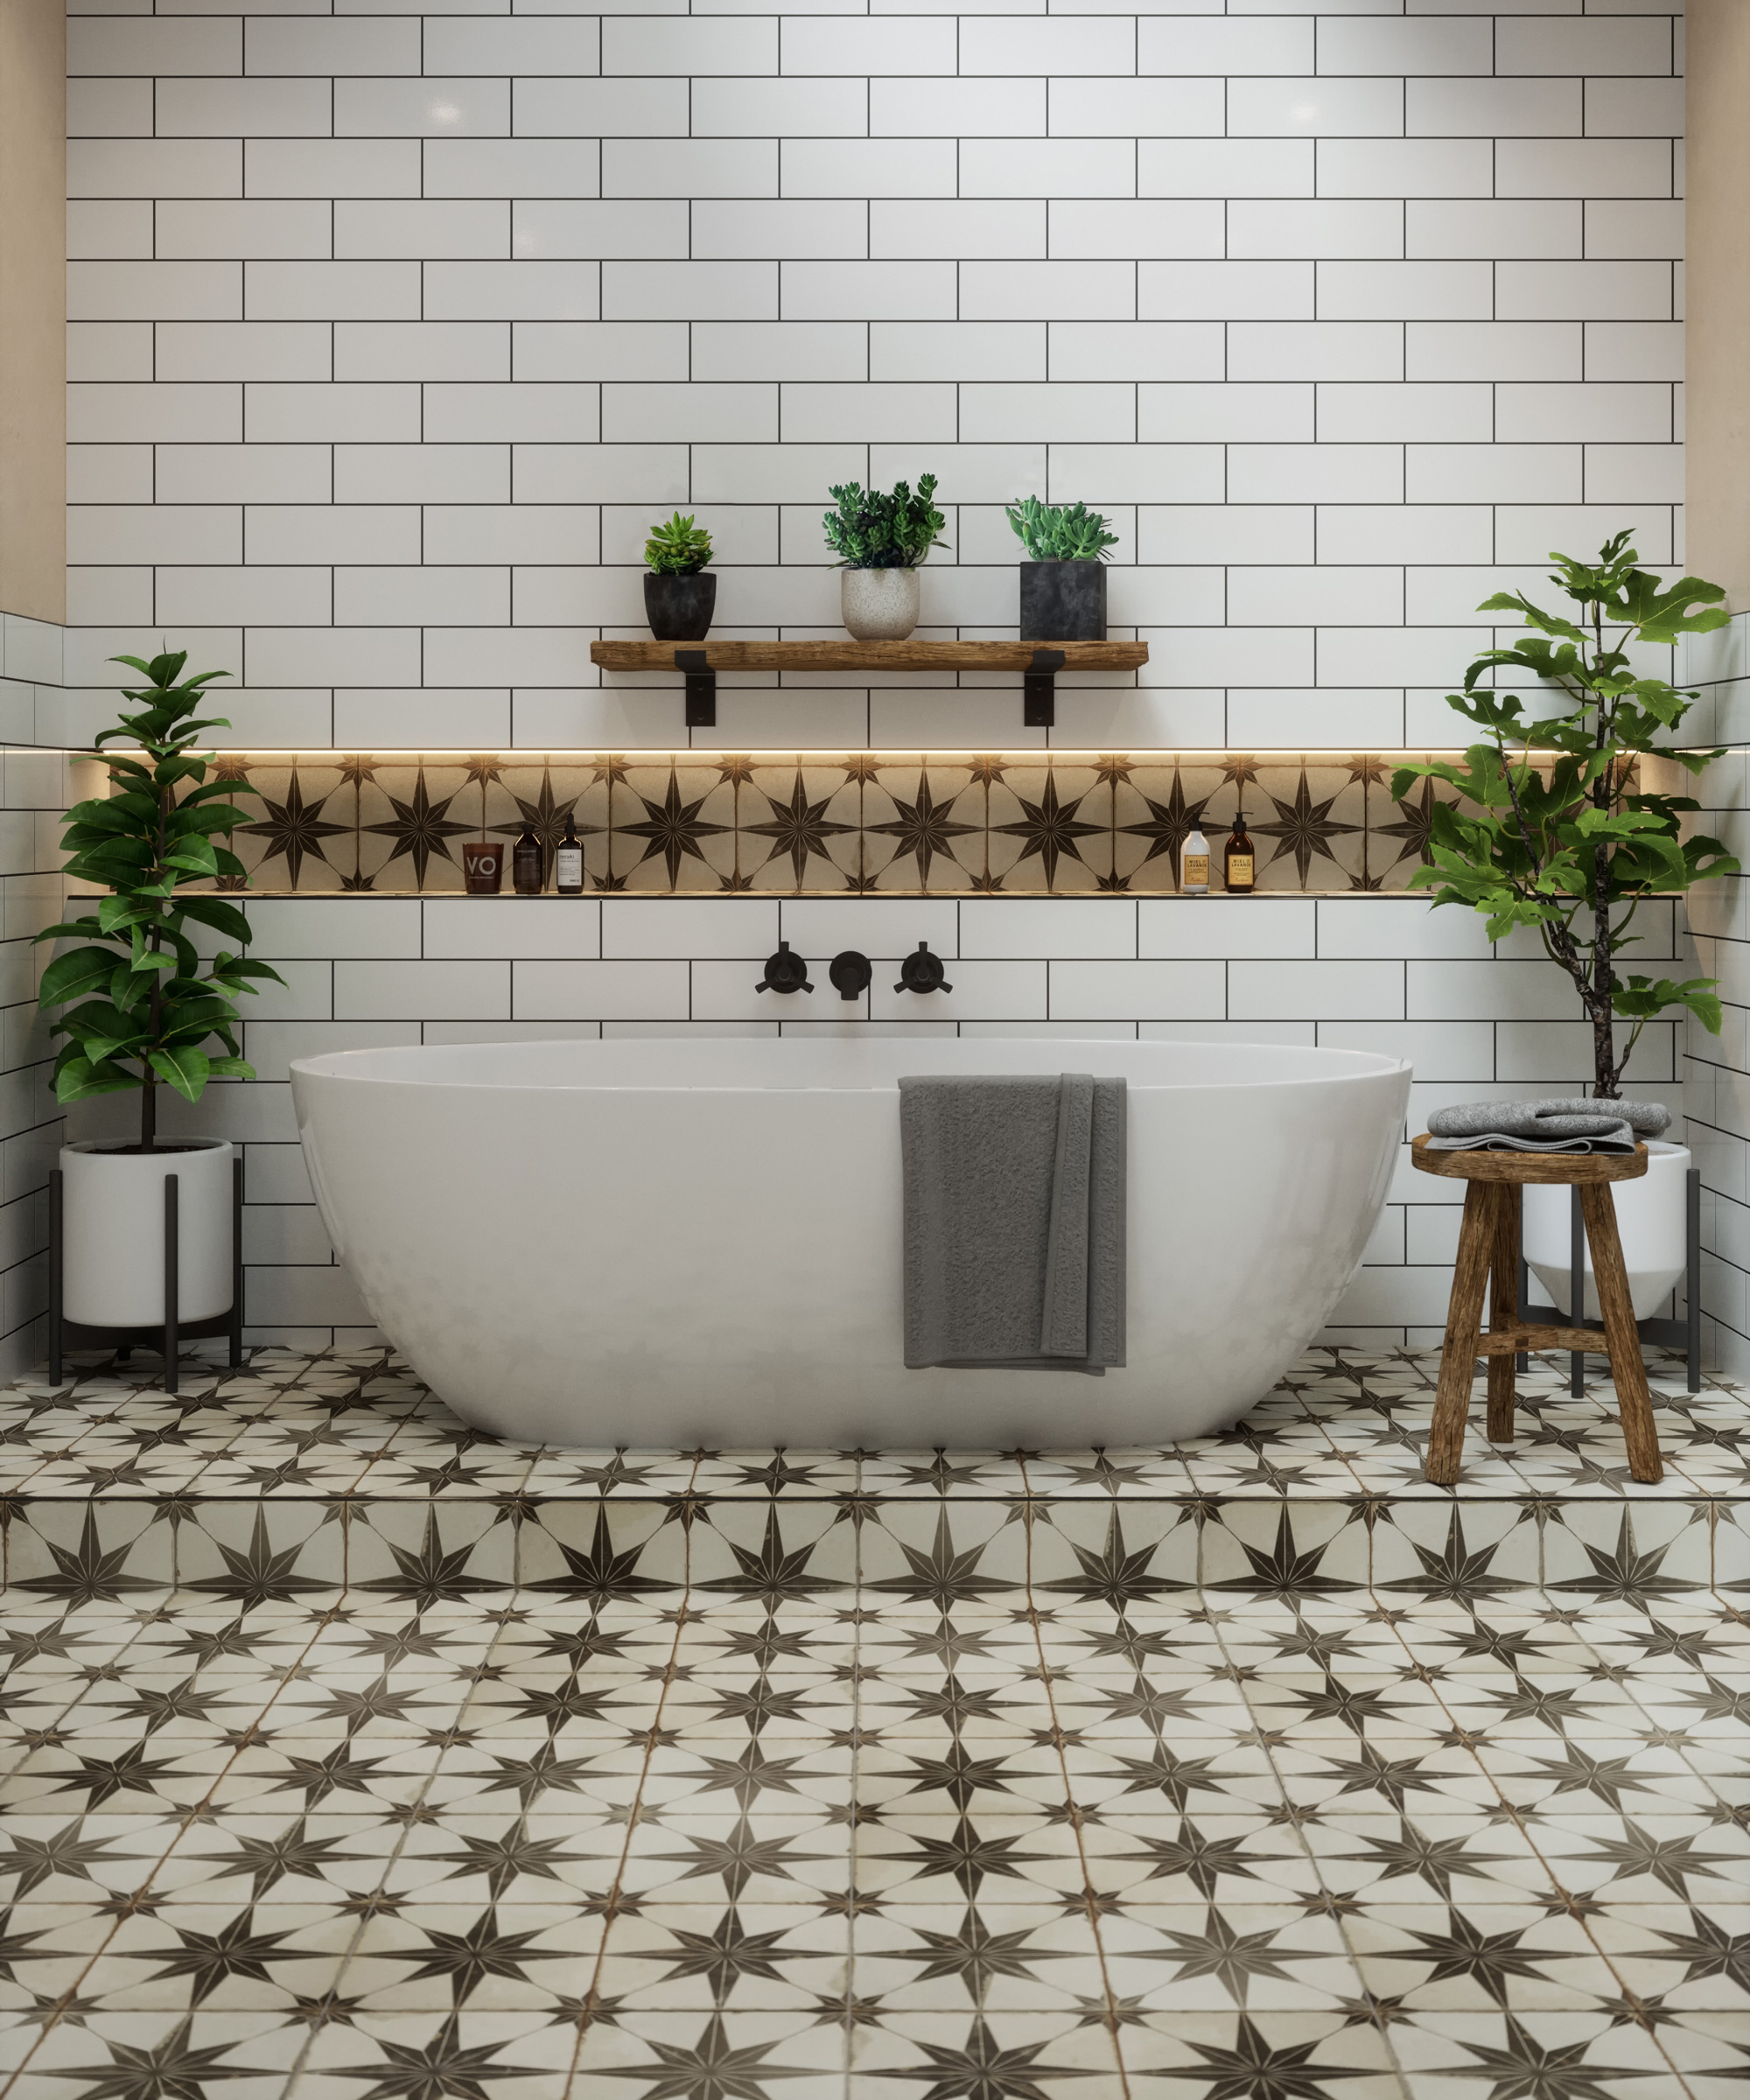 Bathroom tile ideas: 32 new looks to inspire a makeover | Real Homes